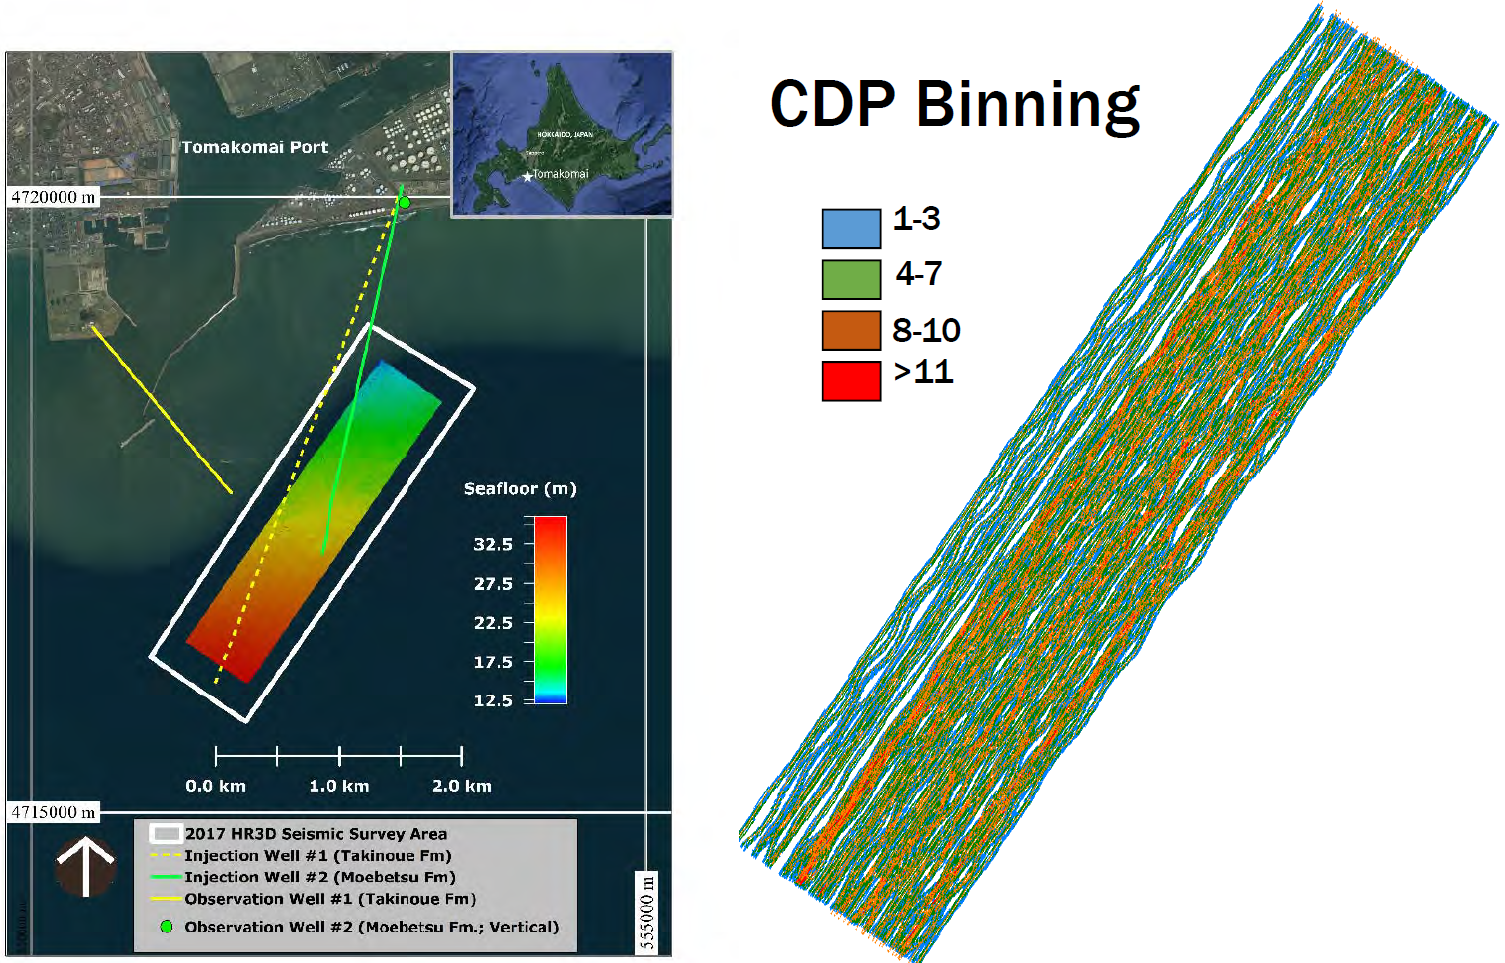 CDP binning of HR3D Seismic Data collected offshore of Tomakomai, Japan.